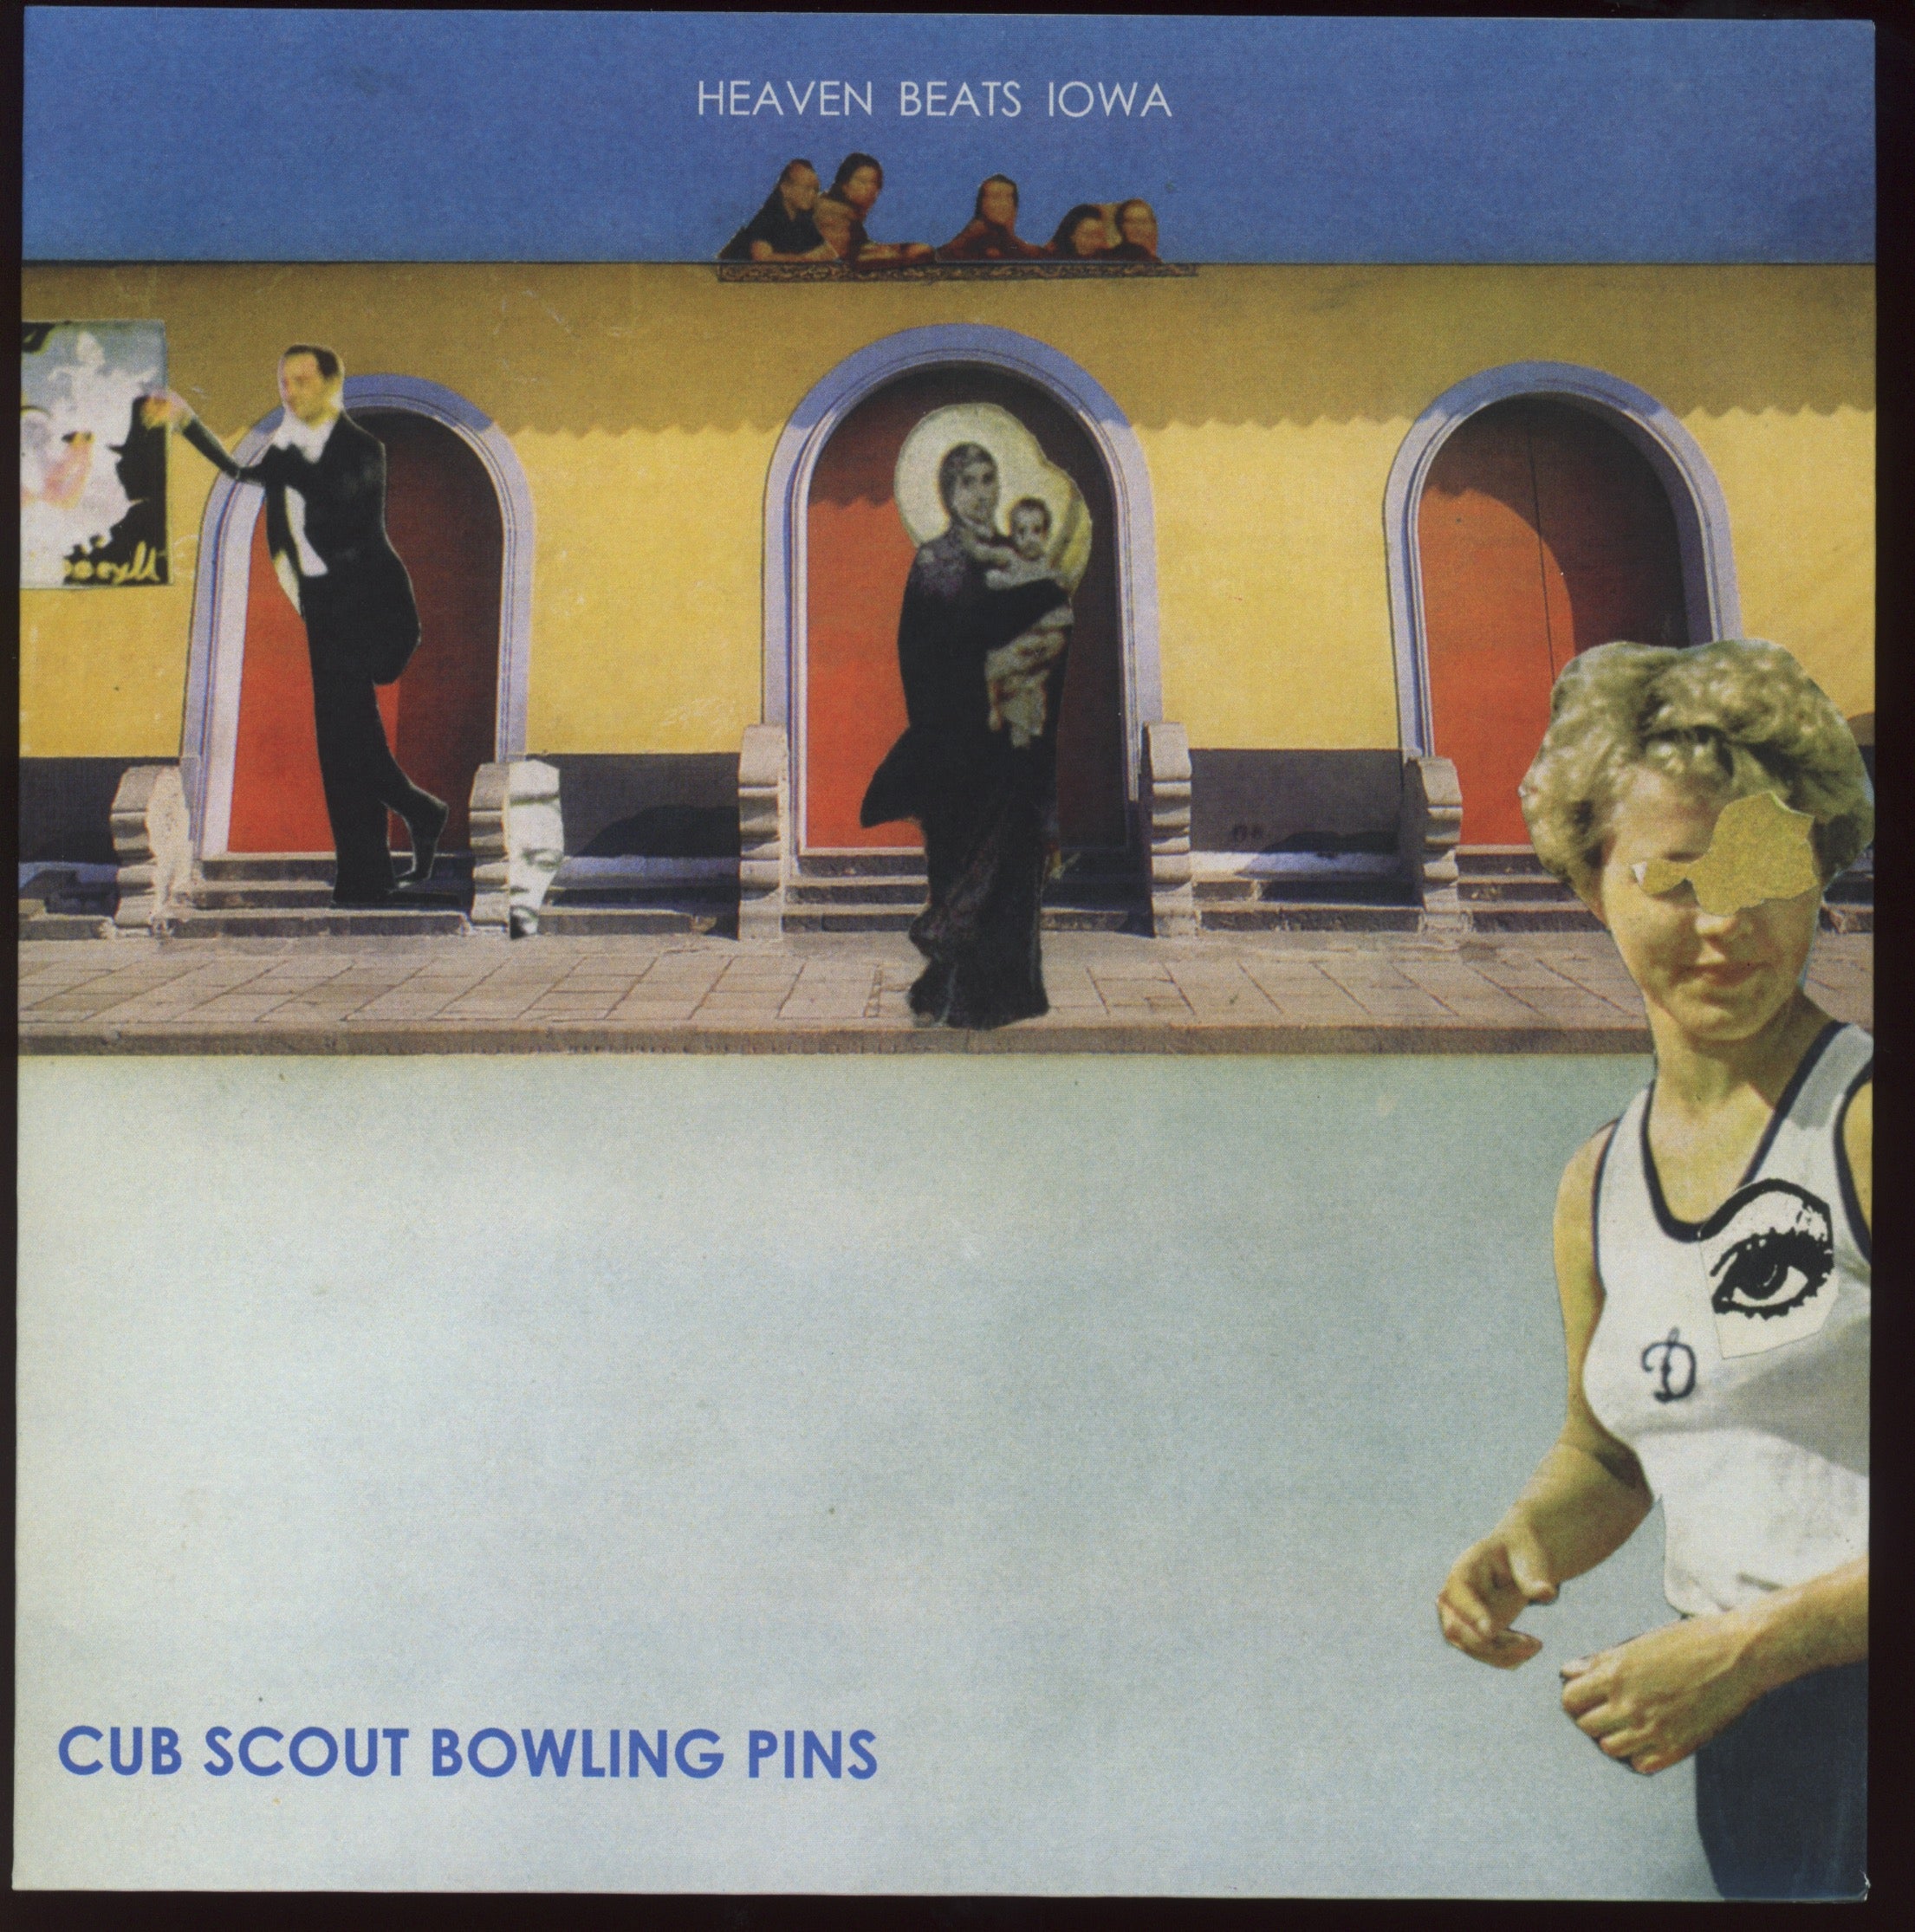 Cubscout Bowling Pins - Heaven Beats Iowa on Guided by Voices Inc. Blue Vinyl